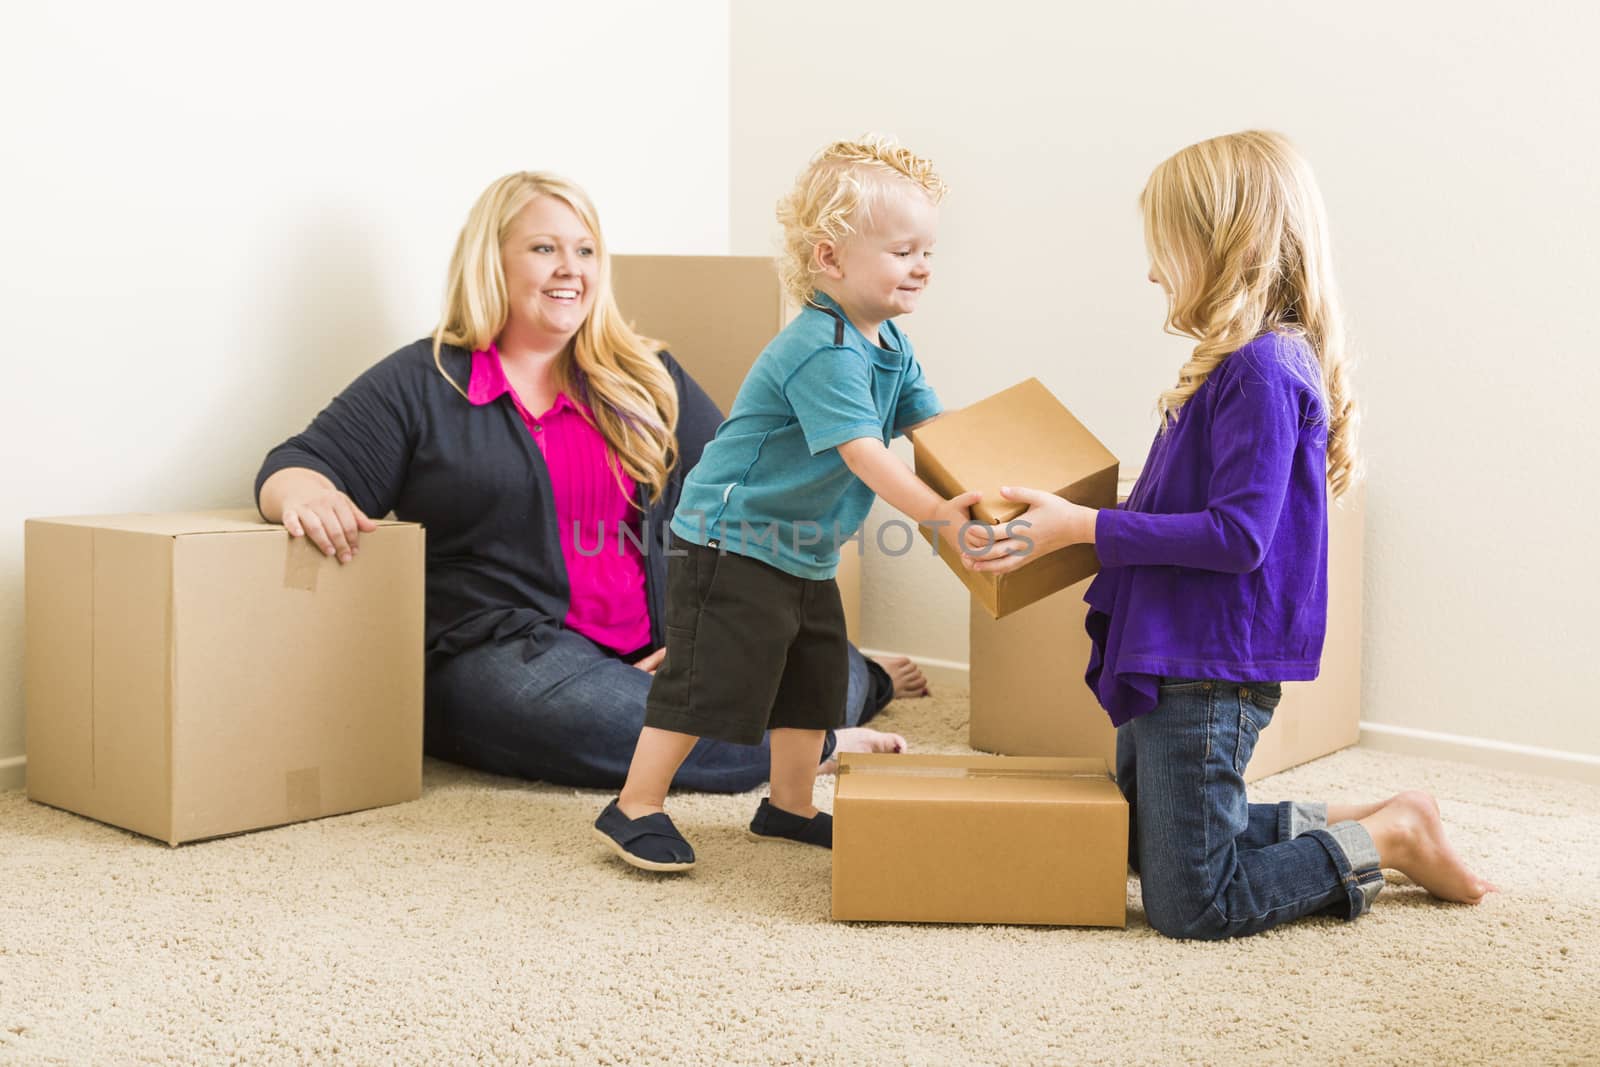 Young Family In Empty Room with Moving Boxes by Feverpitched